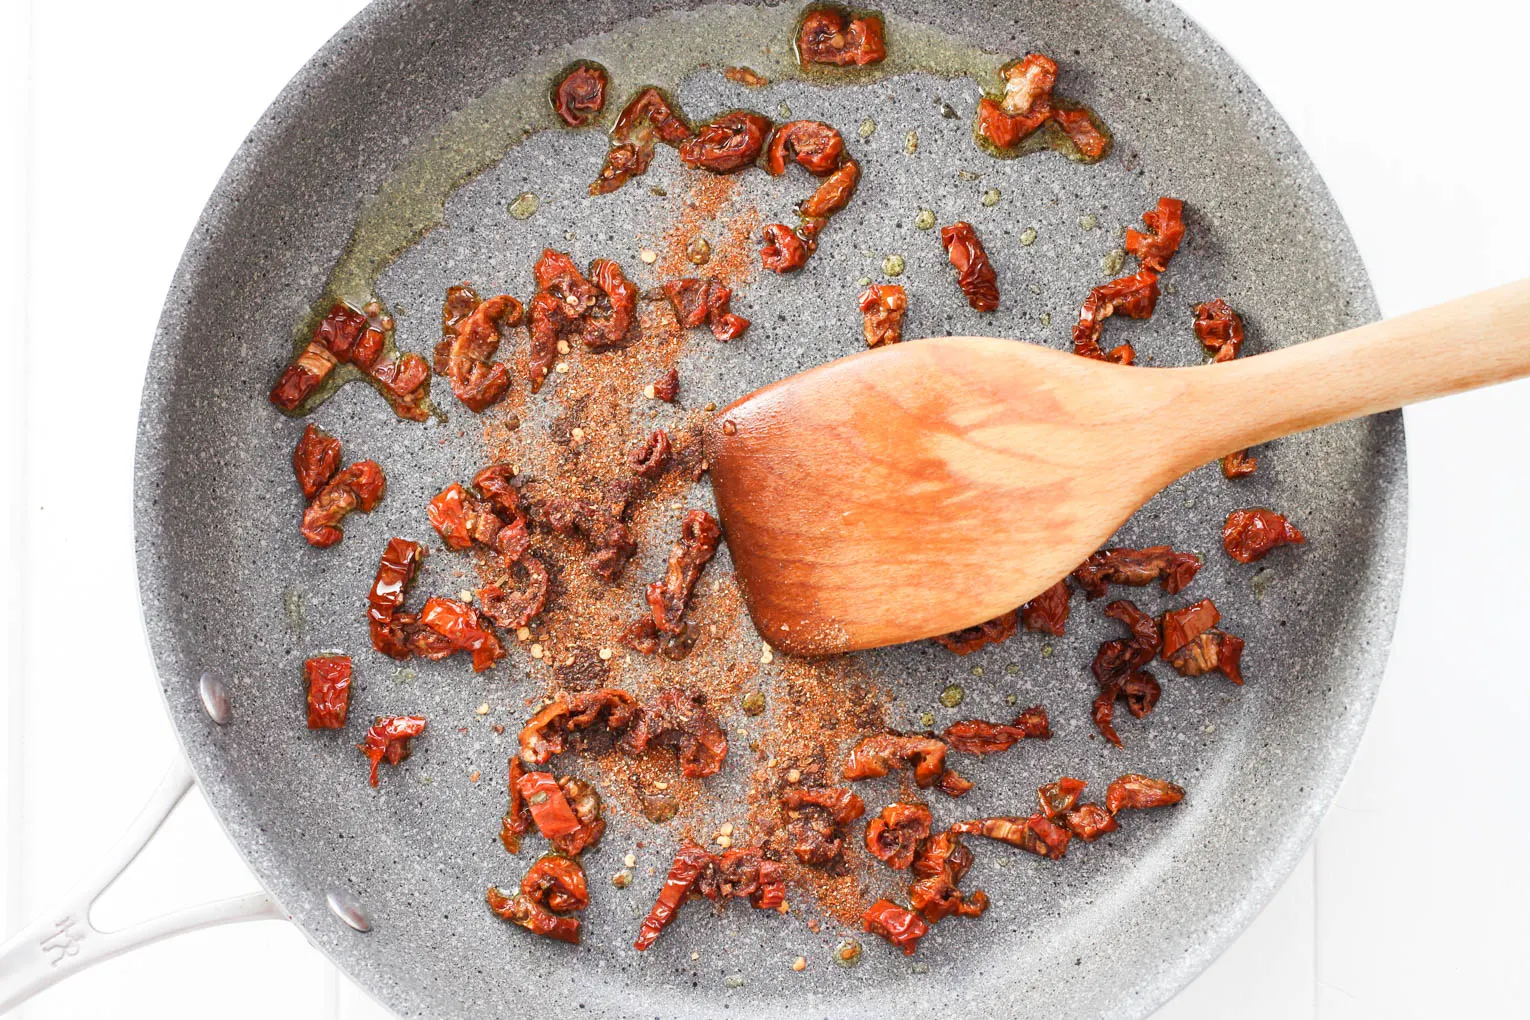 Overhead shot of sun-dried tomatoes being mixed with spices with a wooden spatula.